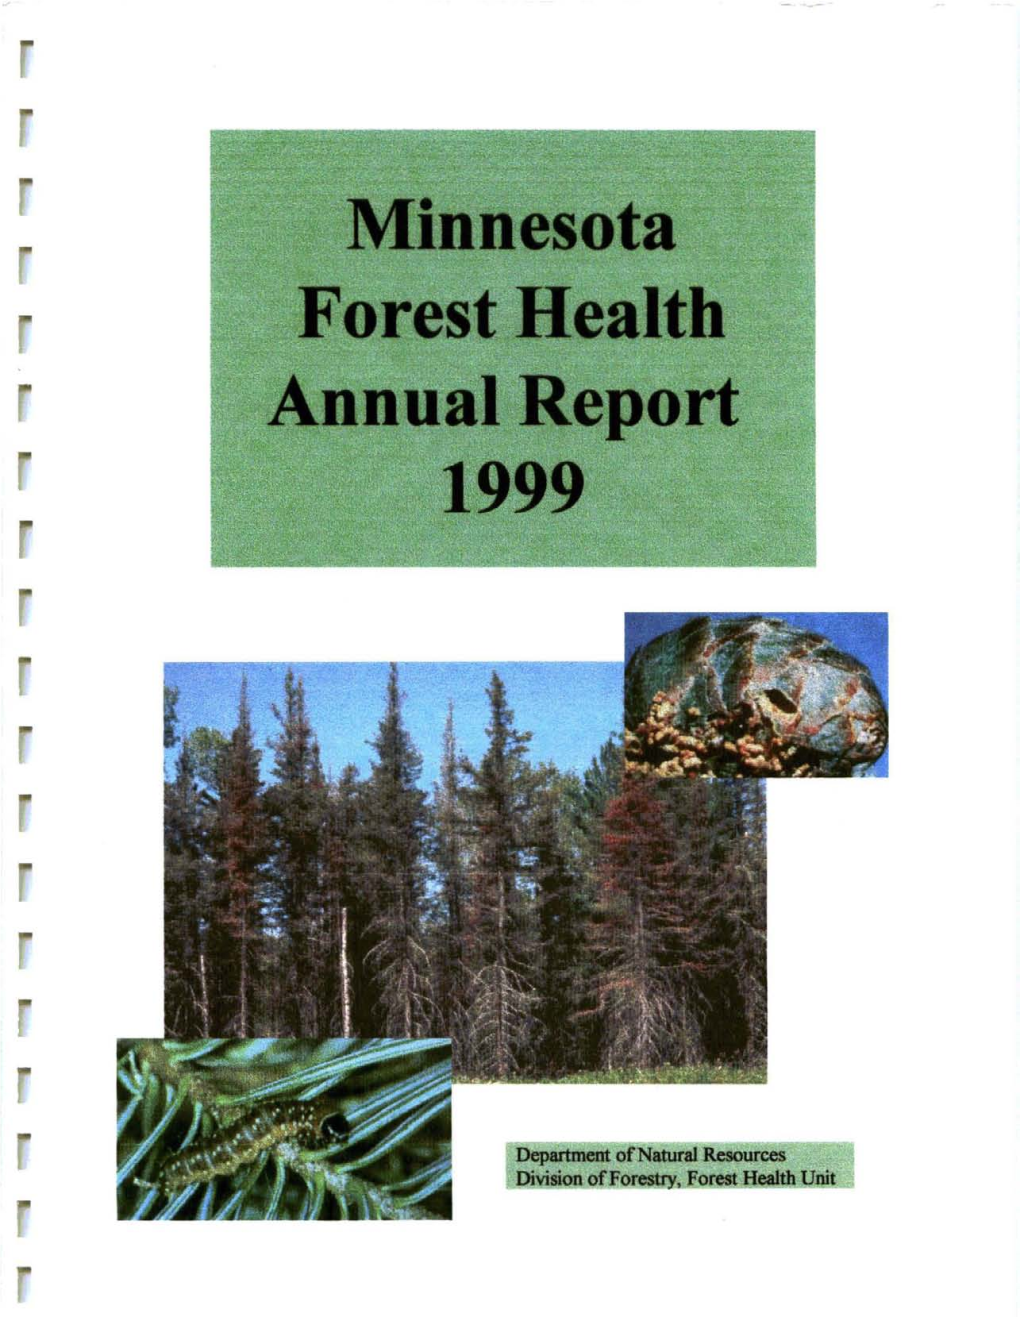 Minnesota Forest Health Annual Report - 1999